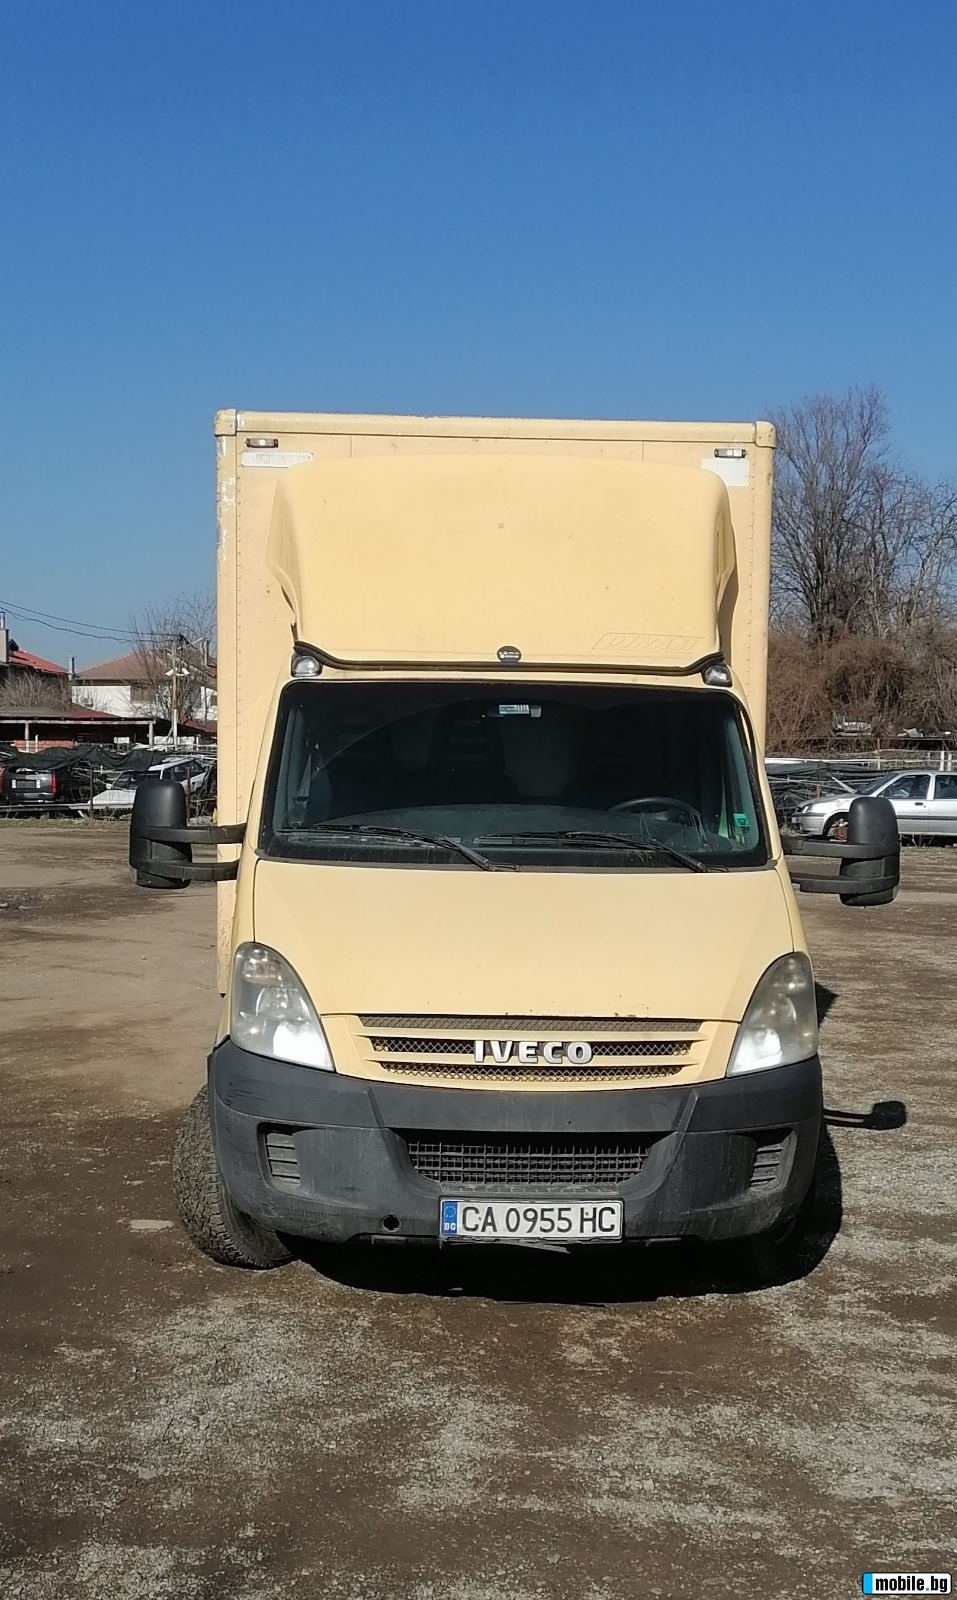 Iveco Daily 35s12  | Mobile.bg   1